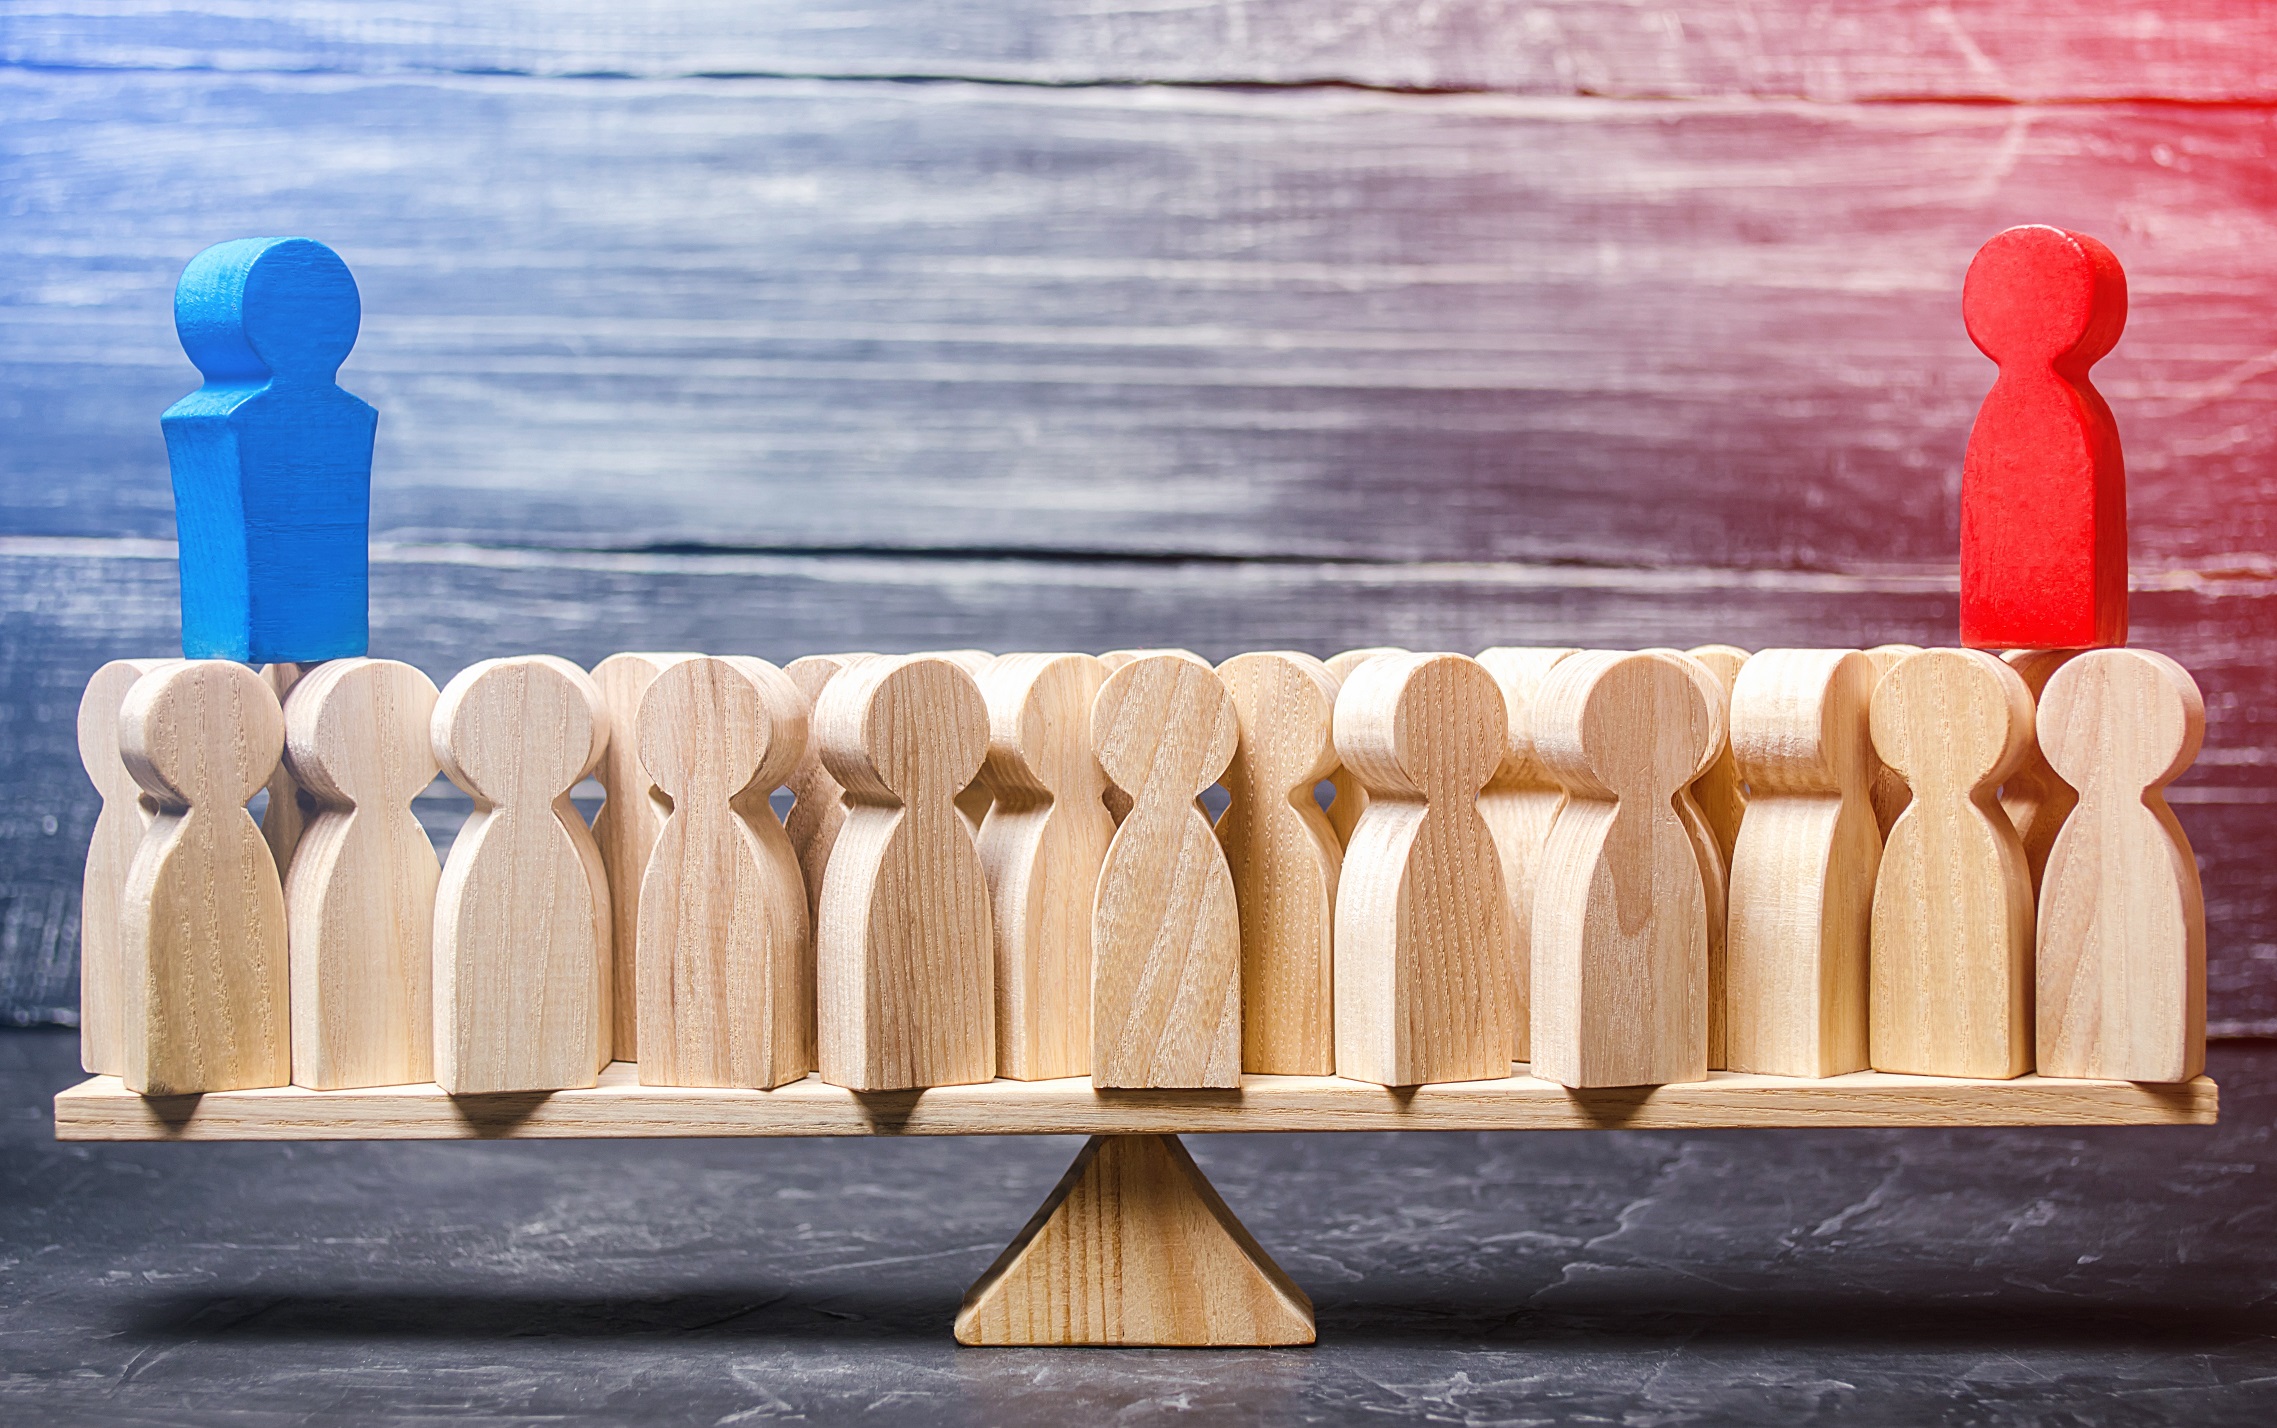 A row of wooden figures on a see-saw, a blue one on the left and a red one on the right stand atop the rest.